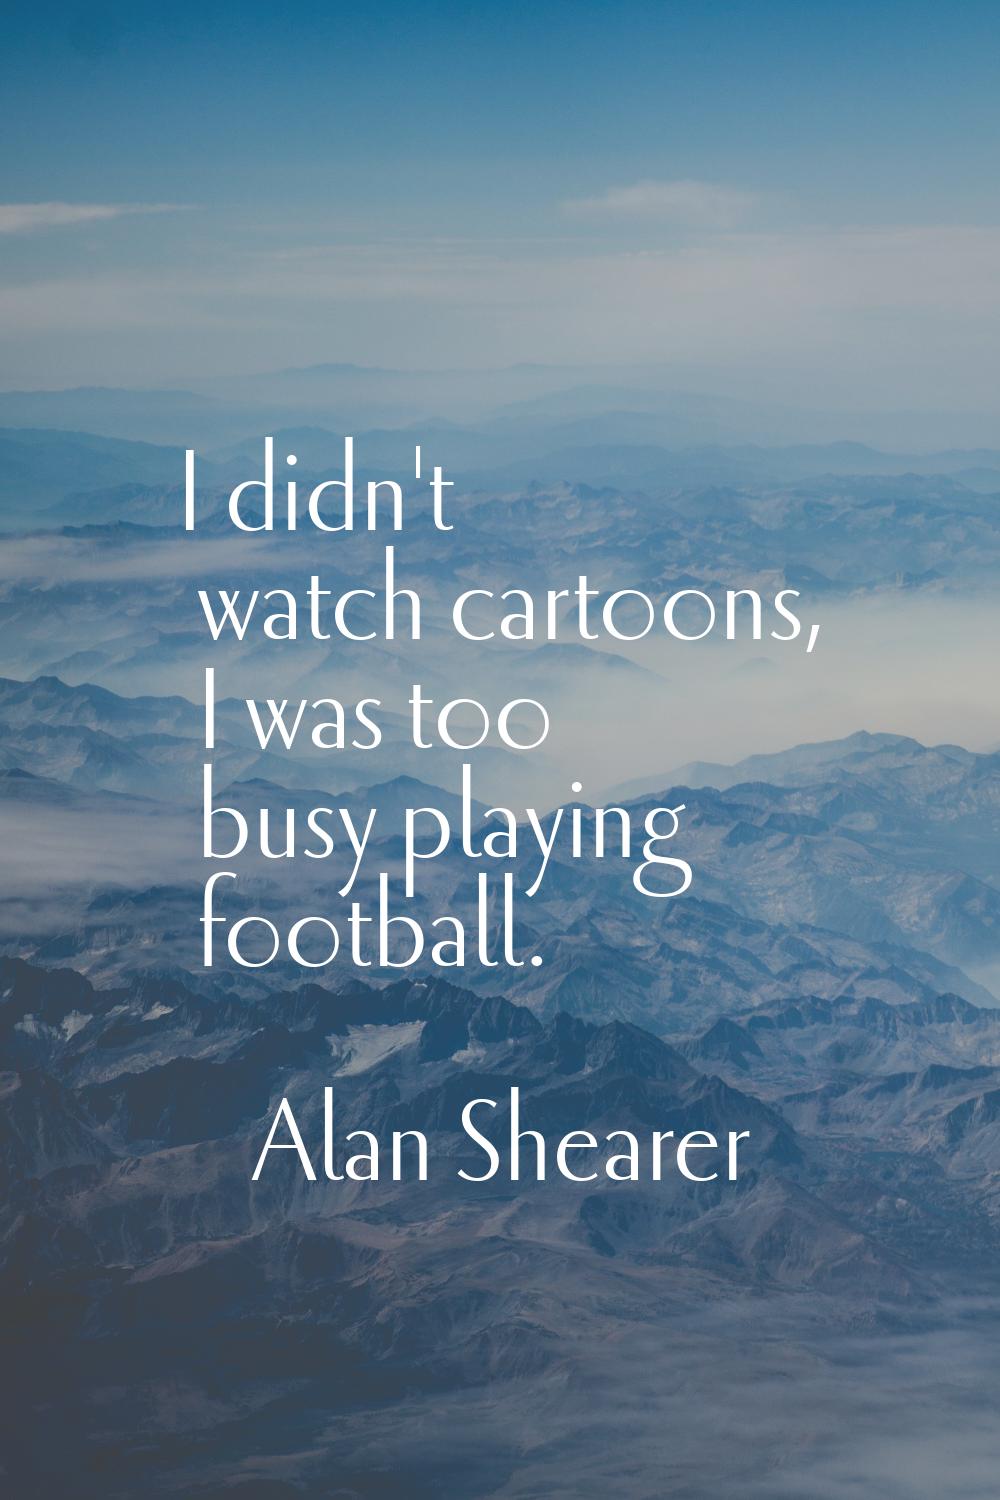 I didn't watch cartoons, I was too busy playing football.